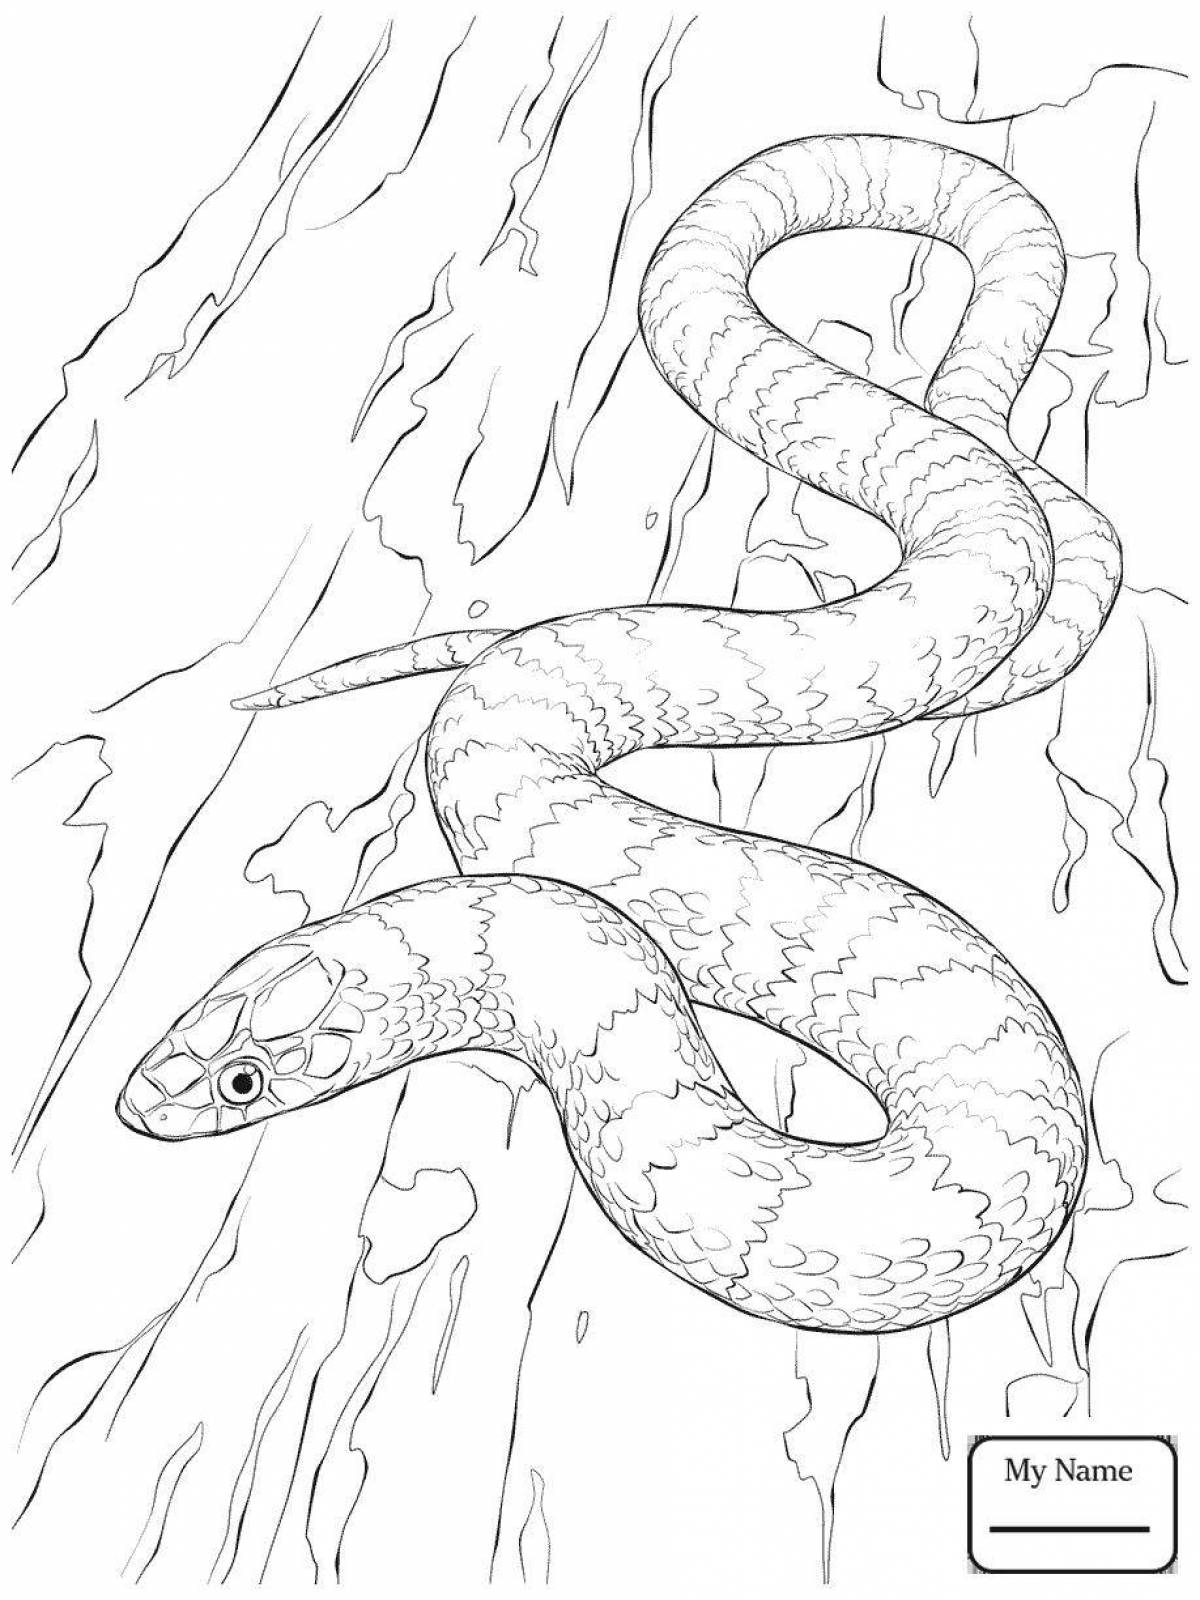 Coloring page gentle steppe viper